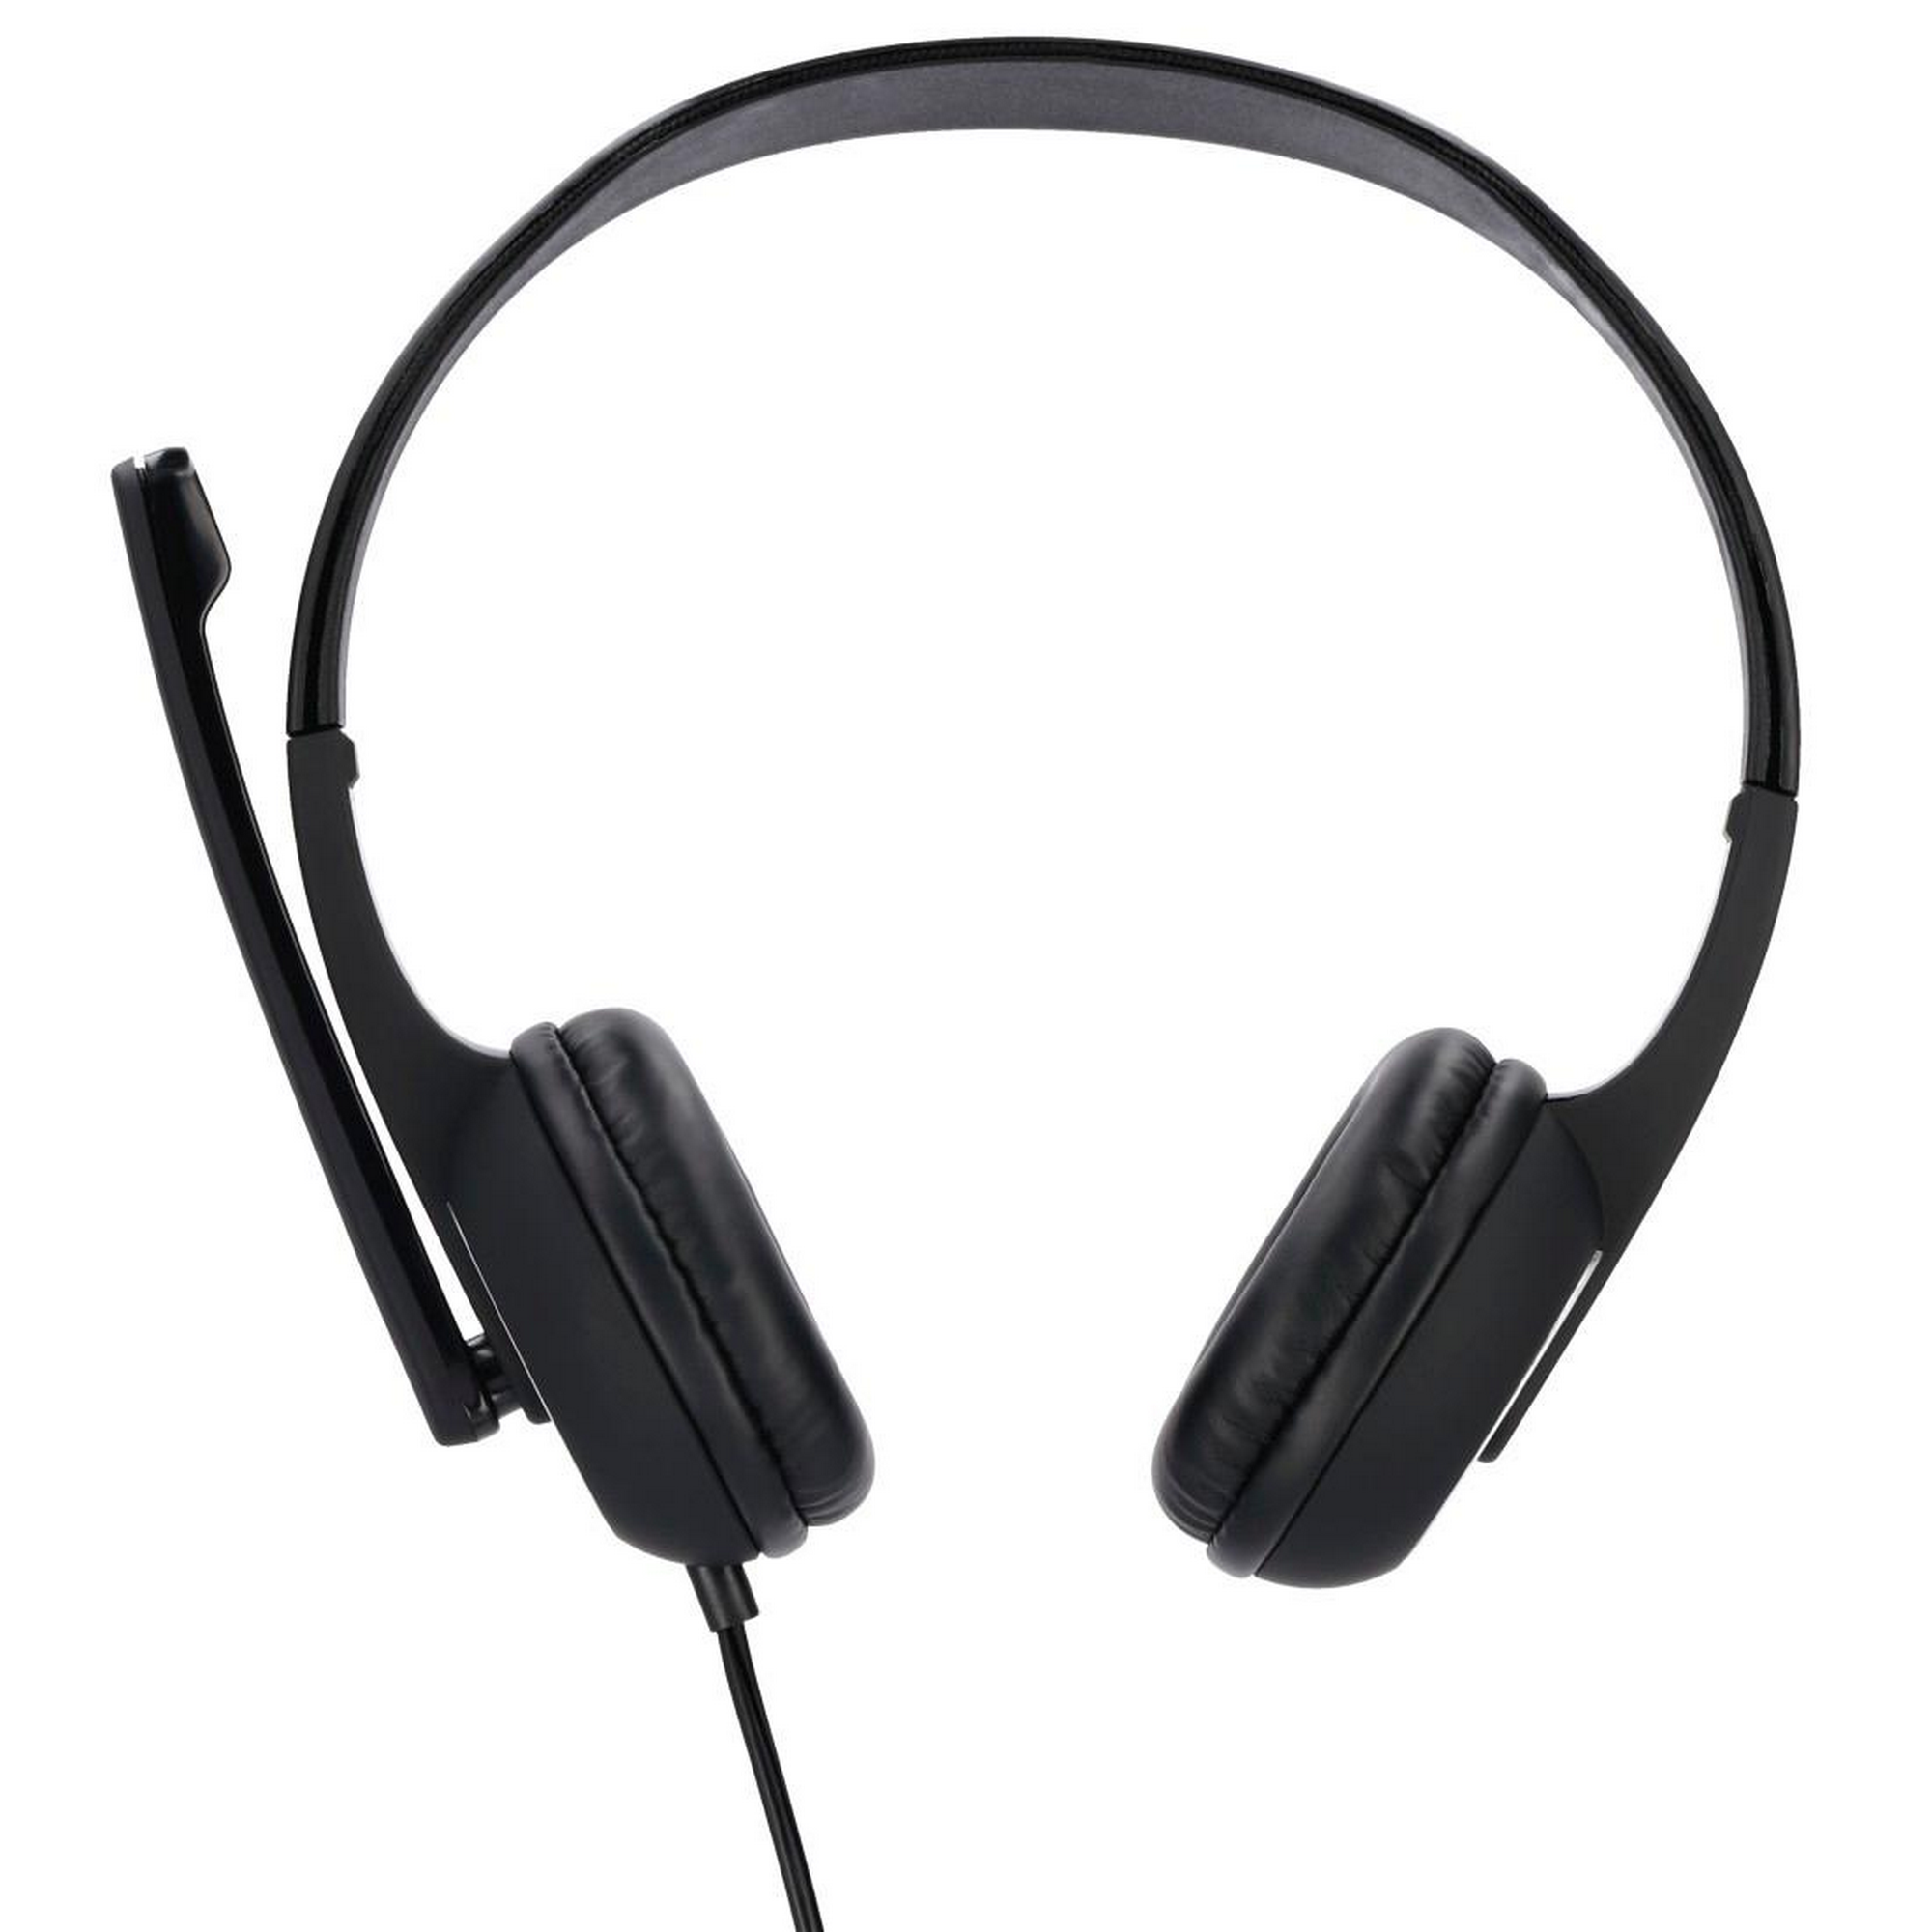 PC-Office-Headset 'HS-P150' Stereo schwarz kabelgebunden + product picture